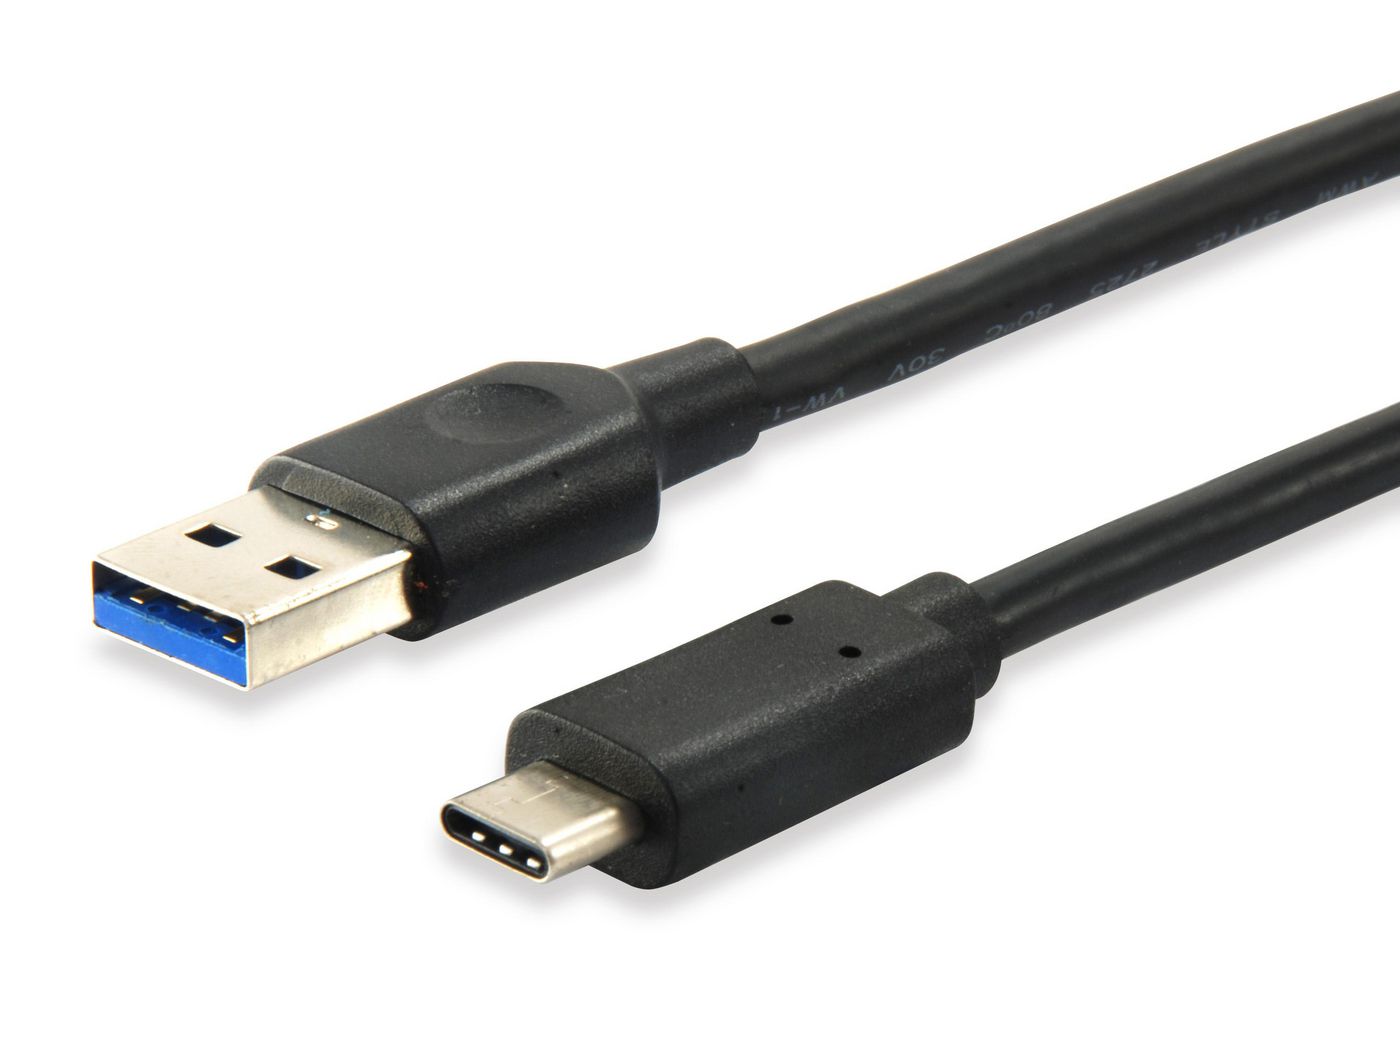 Equip 12834107 USB 3.1 A MALE TO USB 3.0 